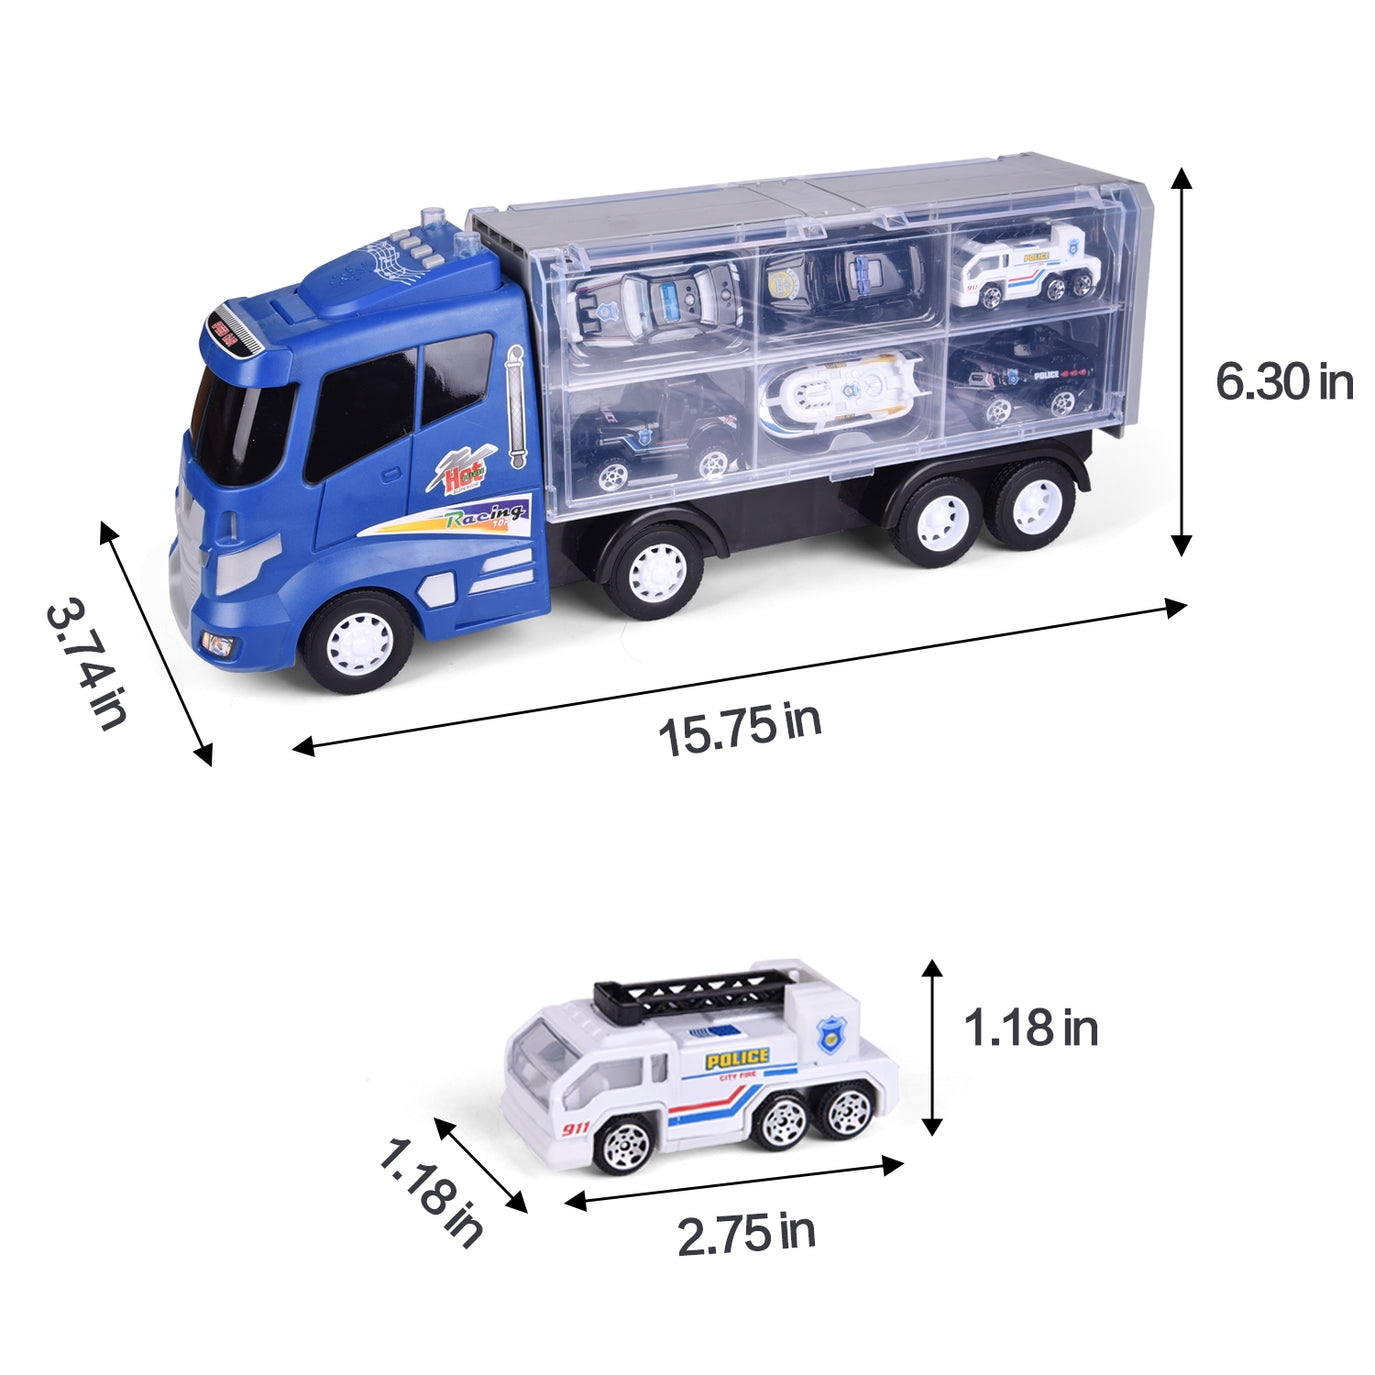 12 in 1 Die-cast Police Car Transport Truck Car Carrier Toy